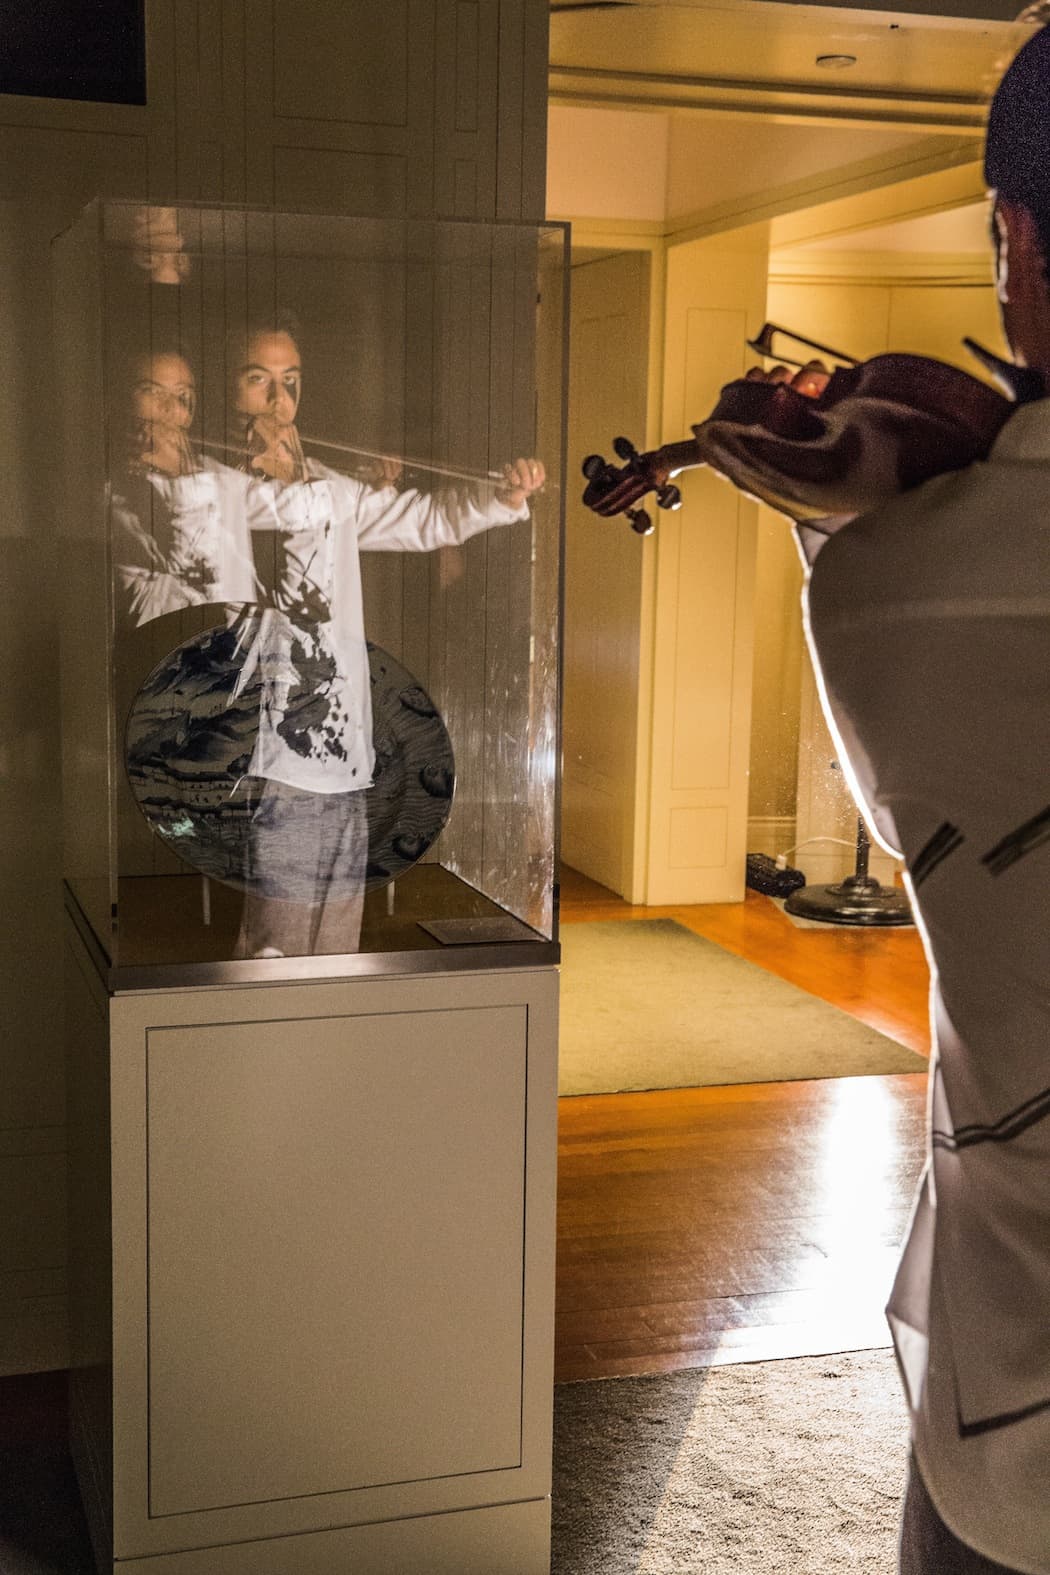 Violinist Keir GoGwilt performs Berg in "Song Cycle" at the Peabody Essex Museum. (Courtesy of John Andrews)